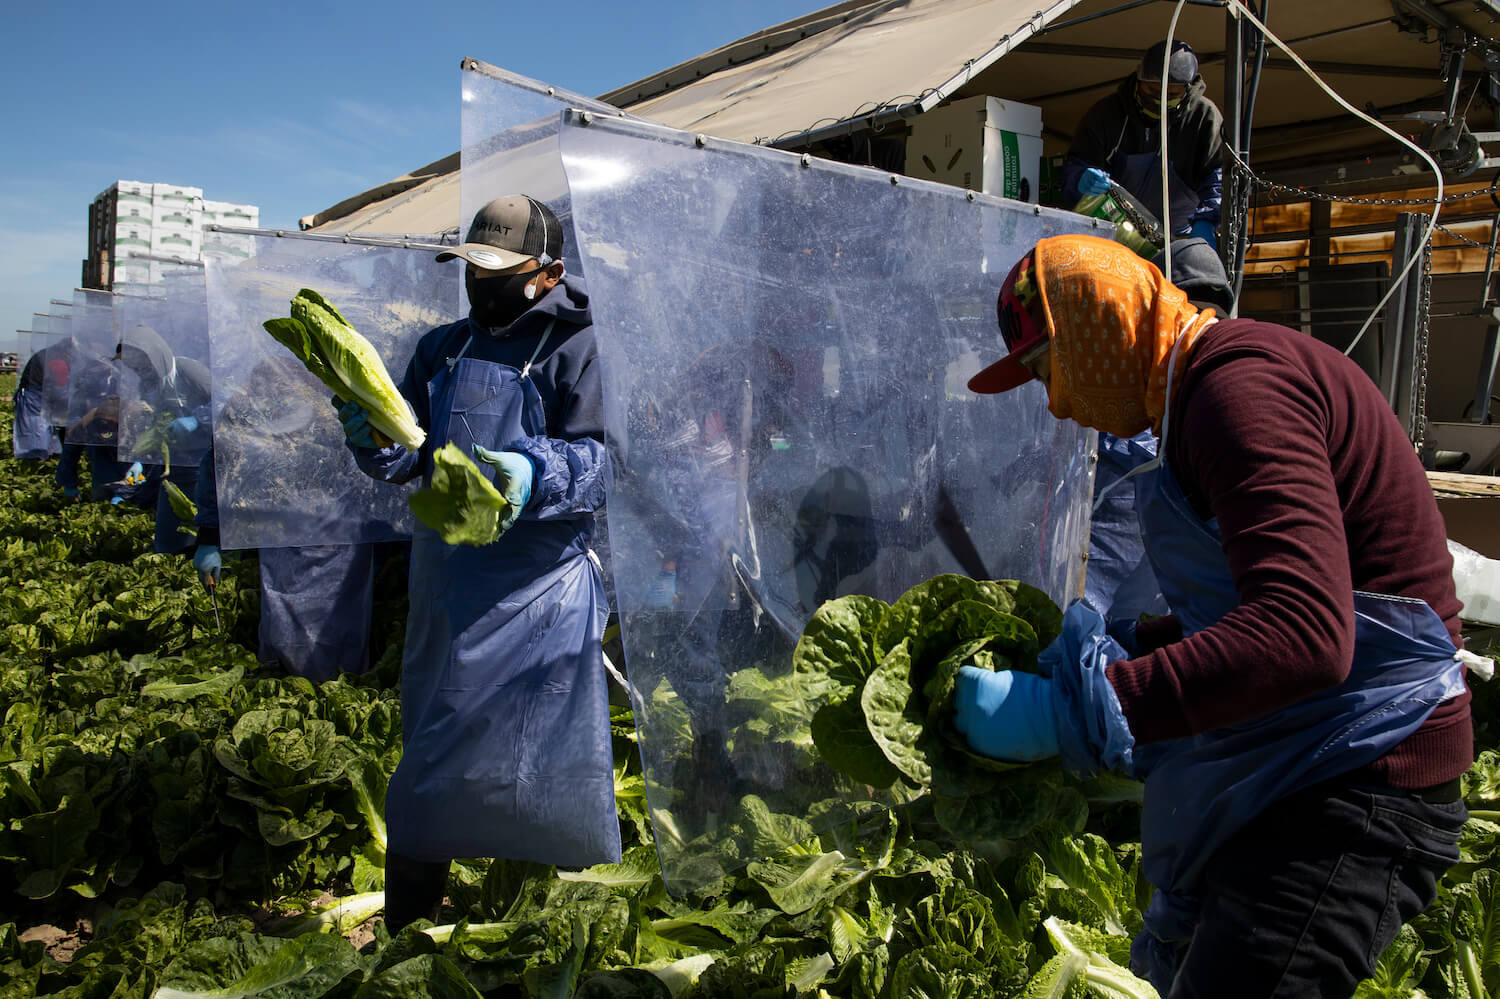 Farm laborers from Fresh Harvest working with an H-2A visa harvest romaine lettuce on a machine with heavy plastic dividers that separate workers from each other on April 27, 2020 in Greenfield, California.